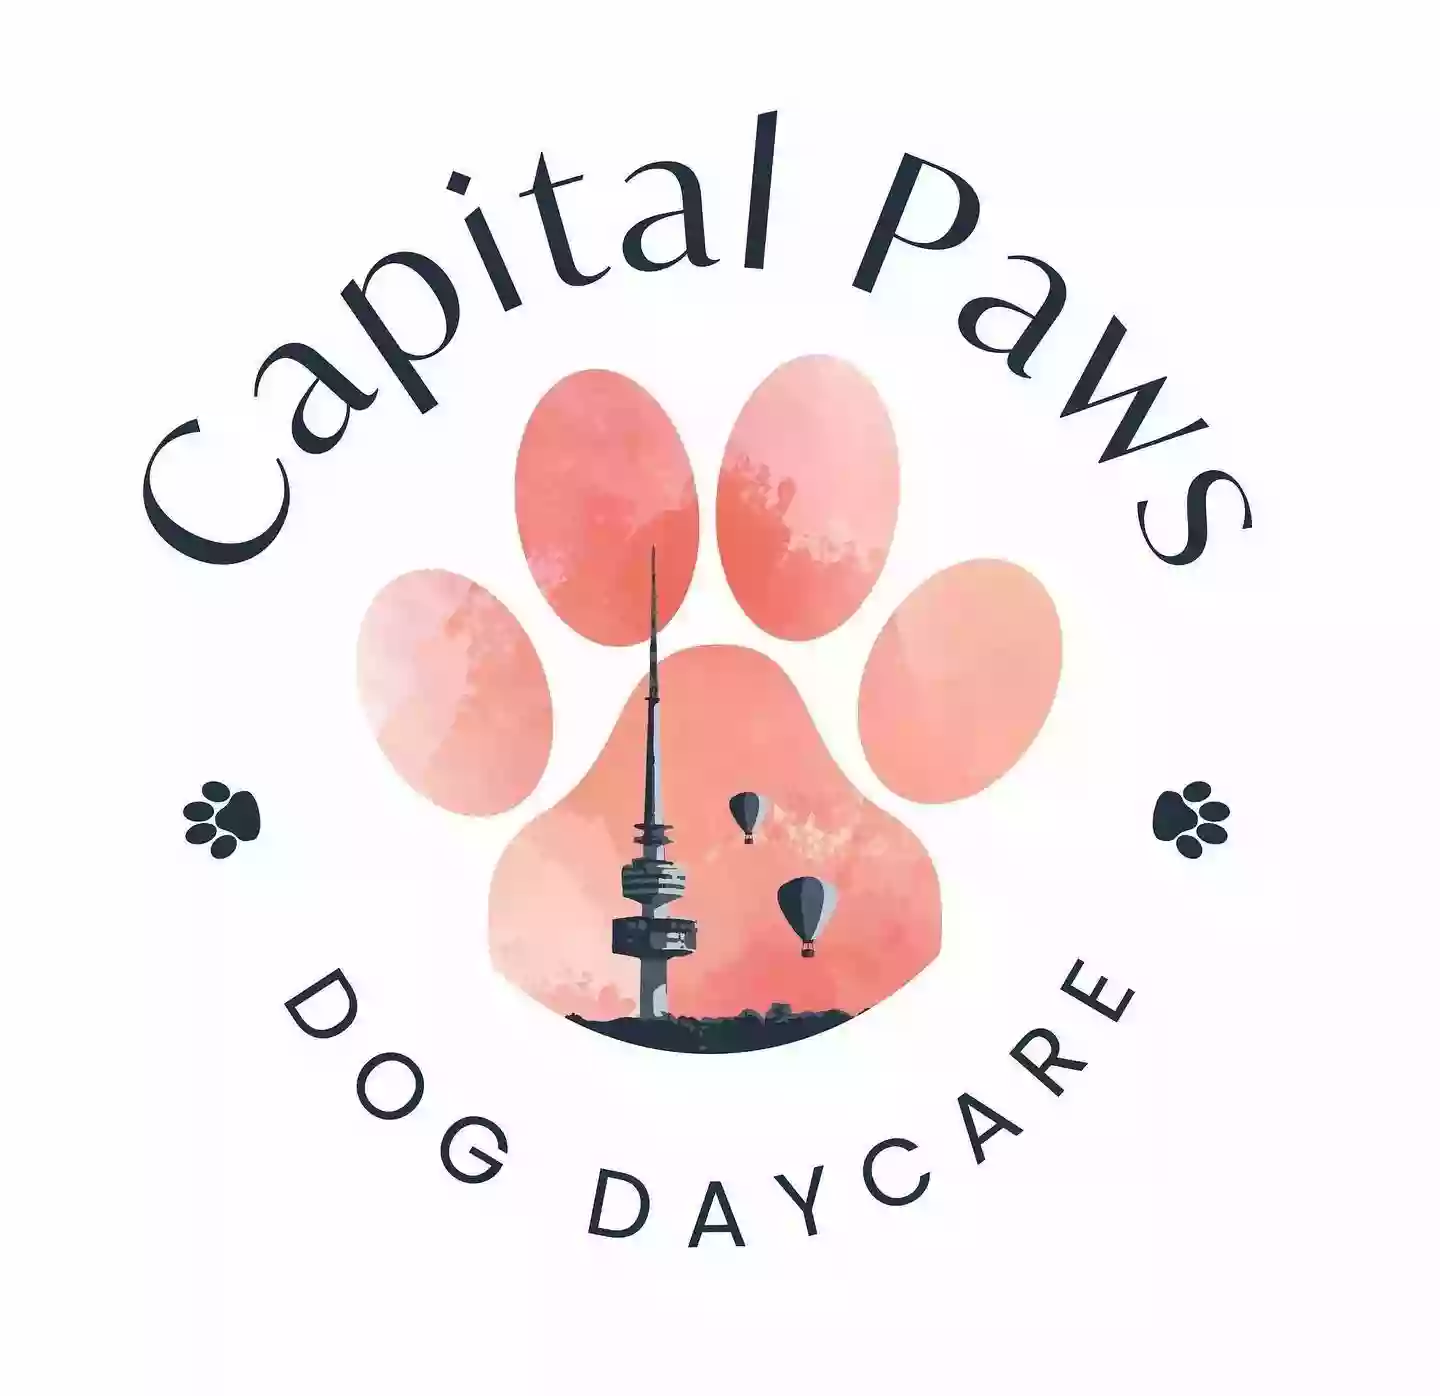 Capital Paws Daycare